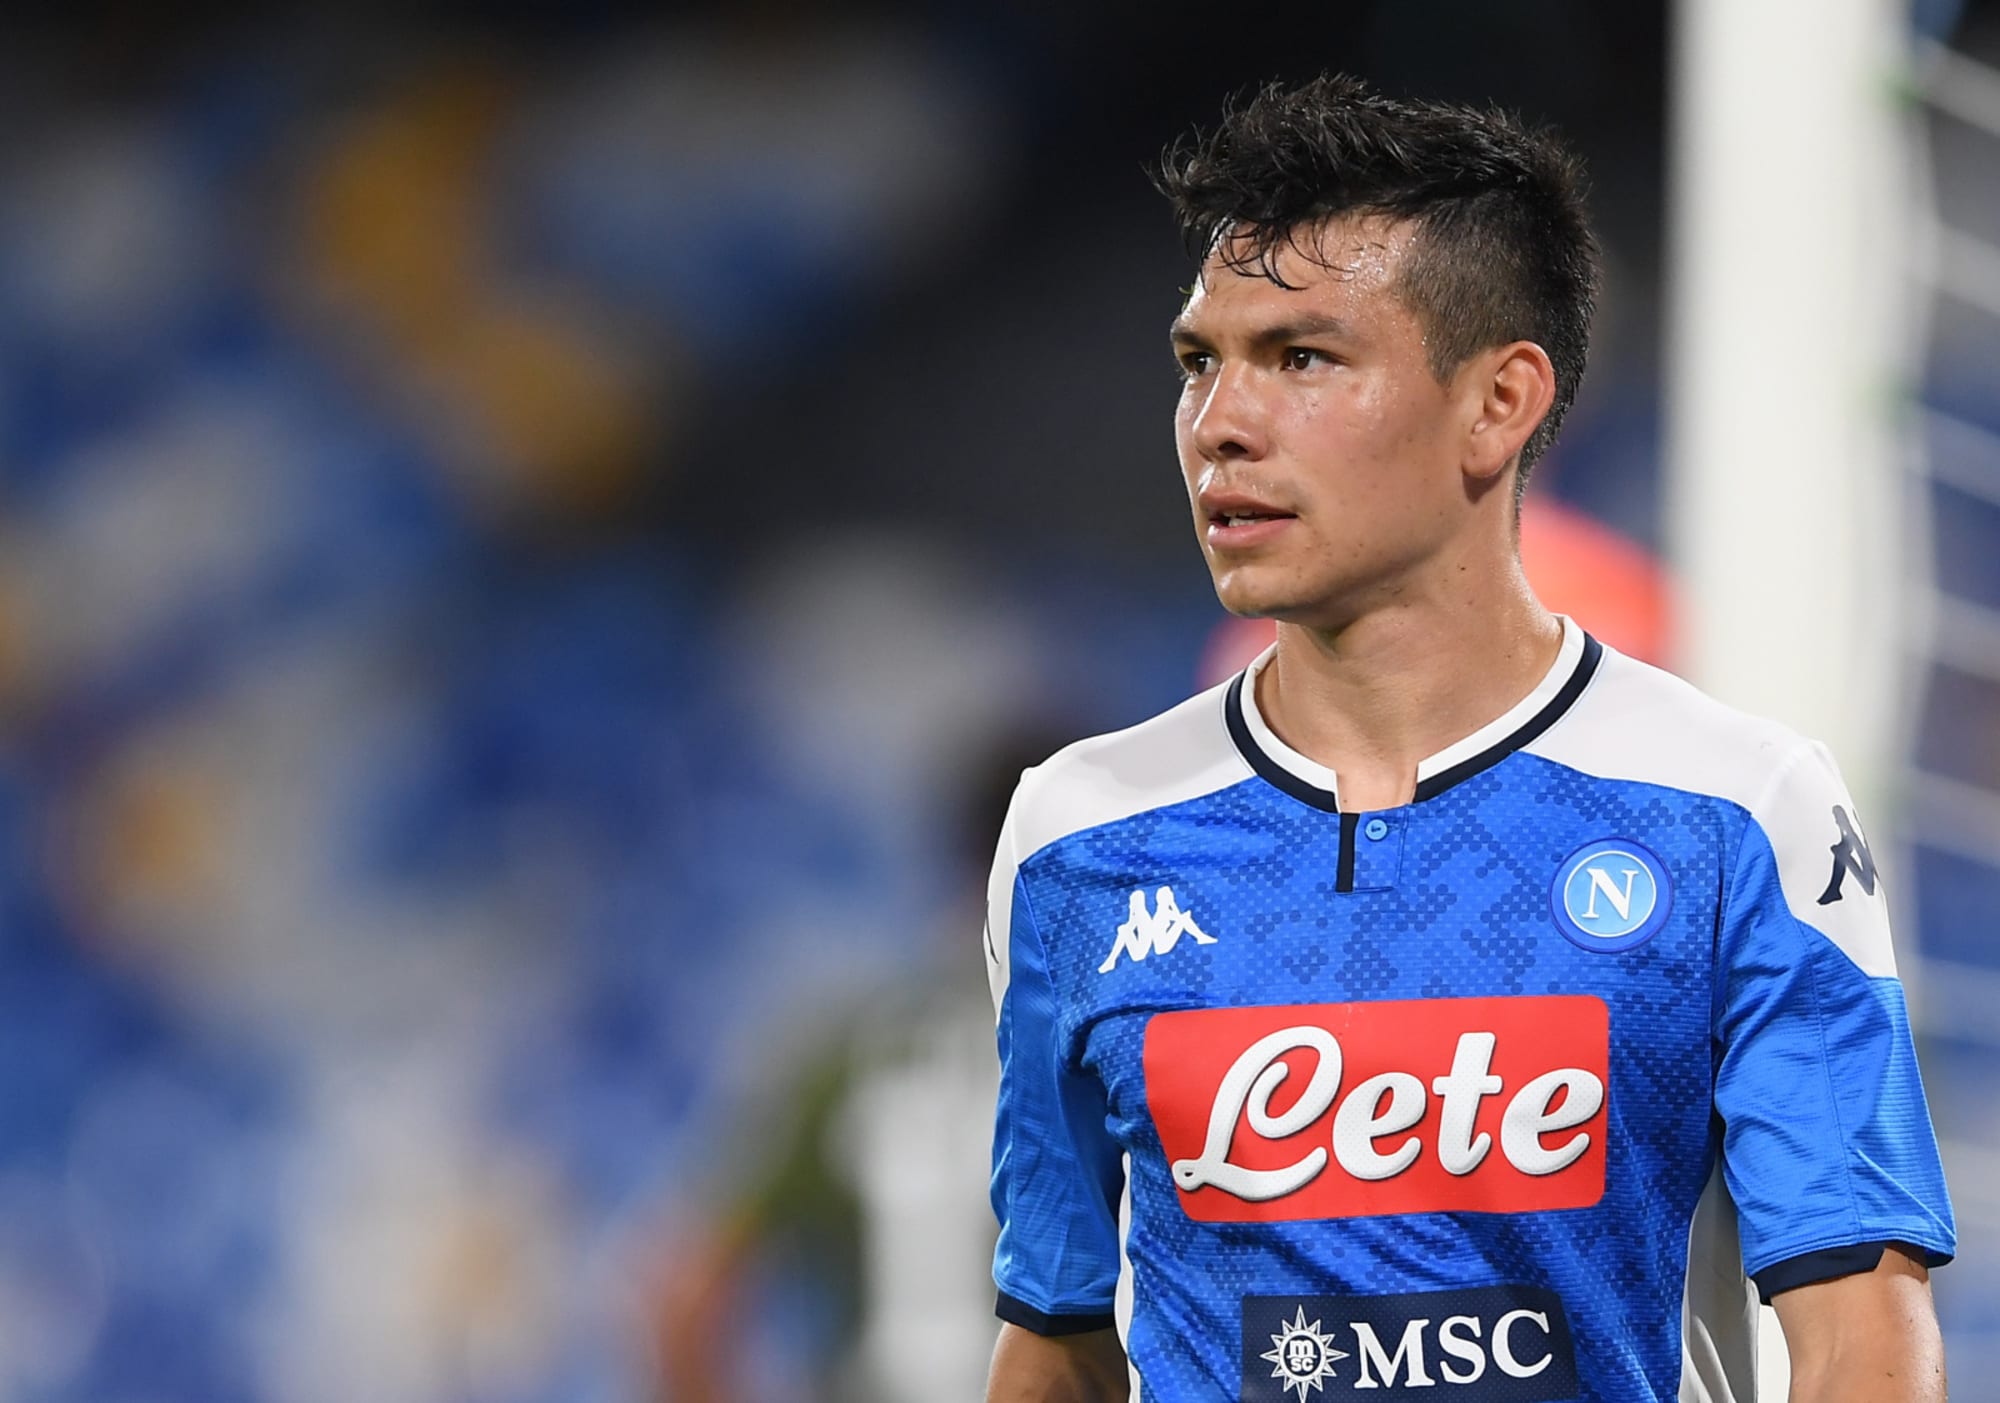 Everton S Offer For Napoli Winger Hirving Lozano May Not Be Enough